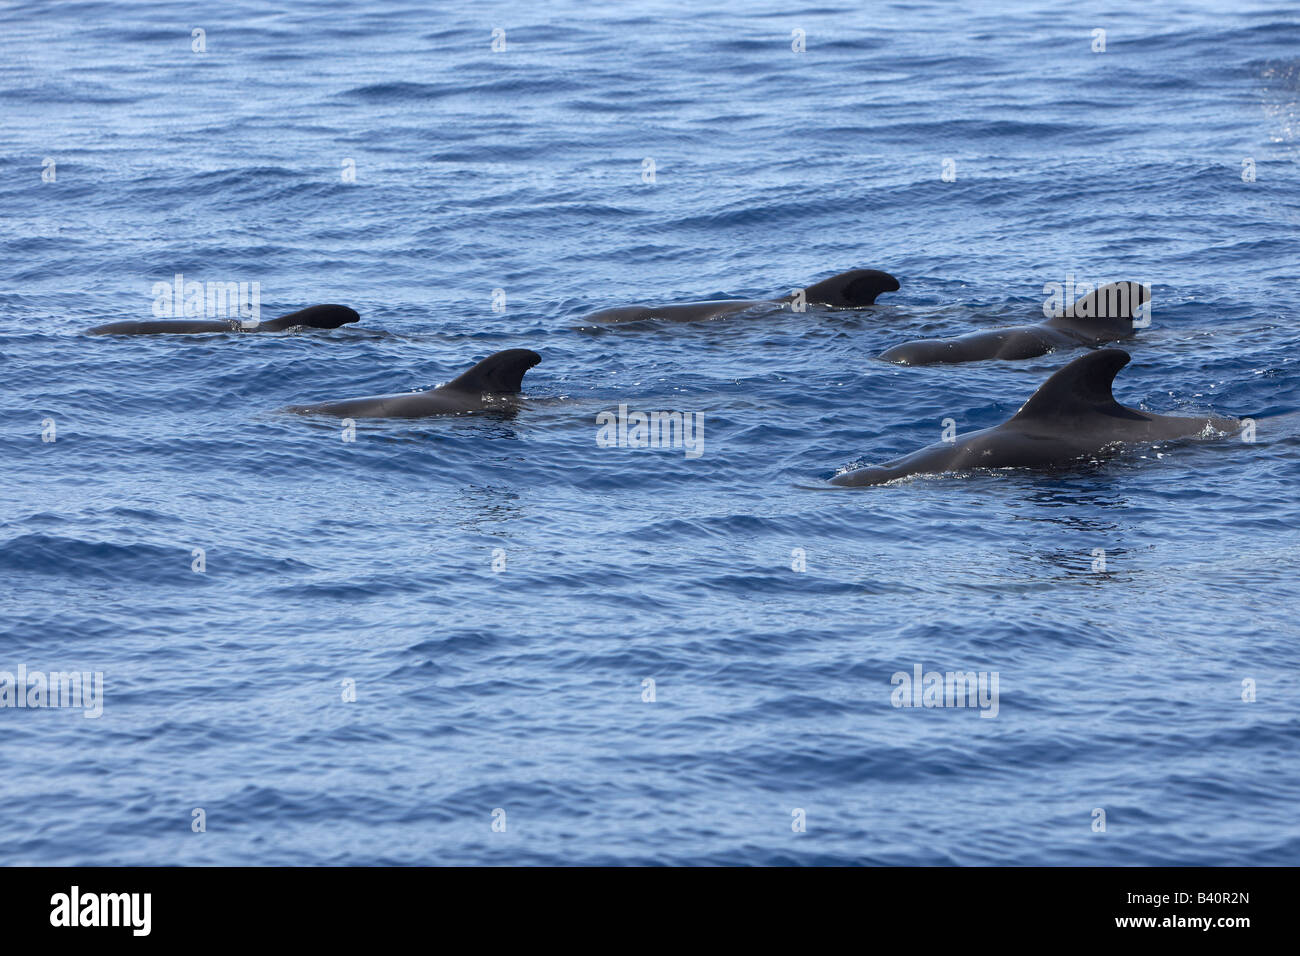 Whales in sea Stock Photo